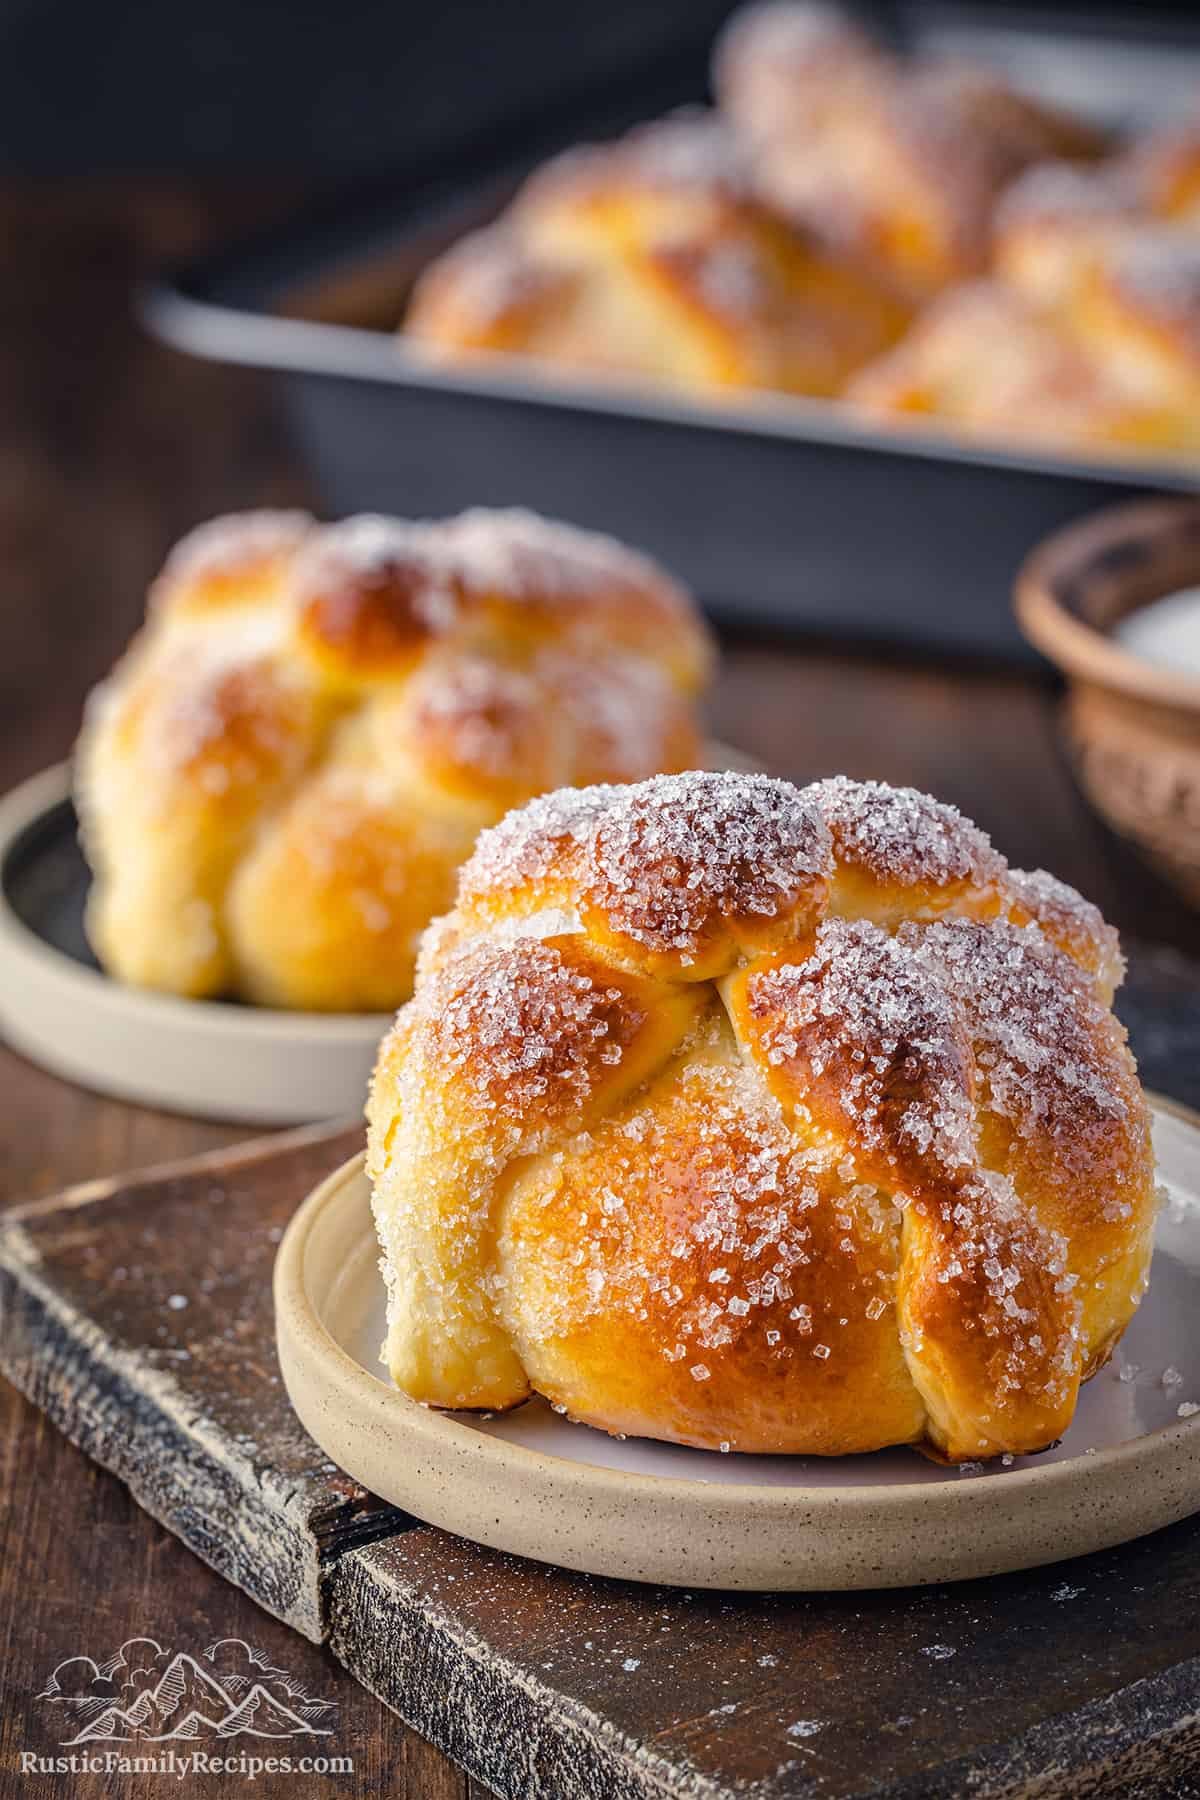 Pan de muerto sprinkled with sugar on a plate.